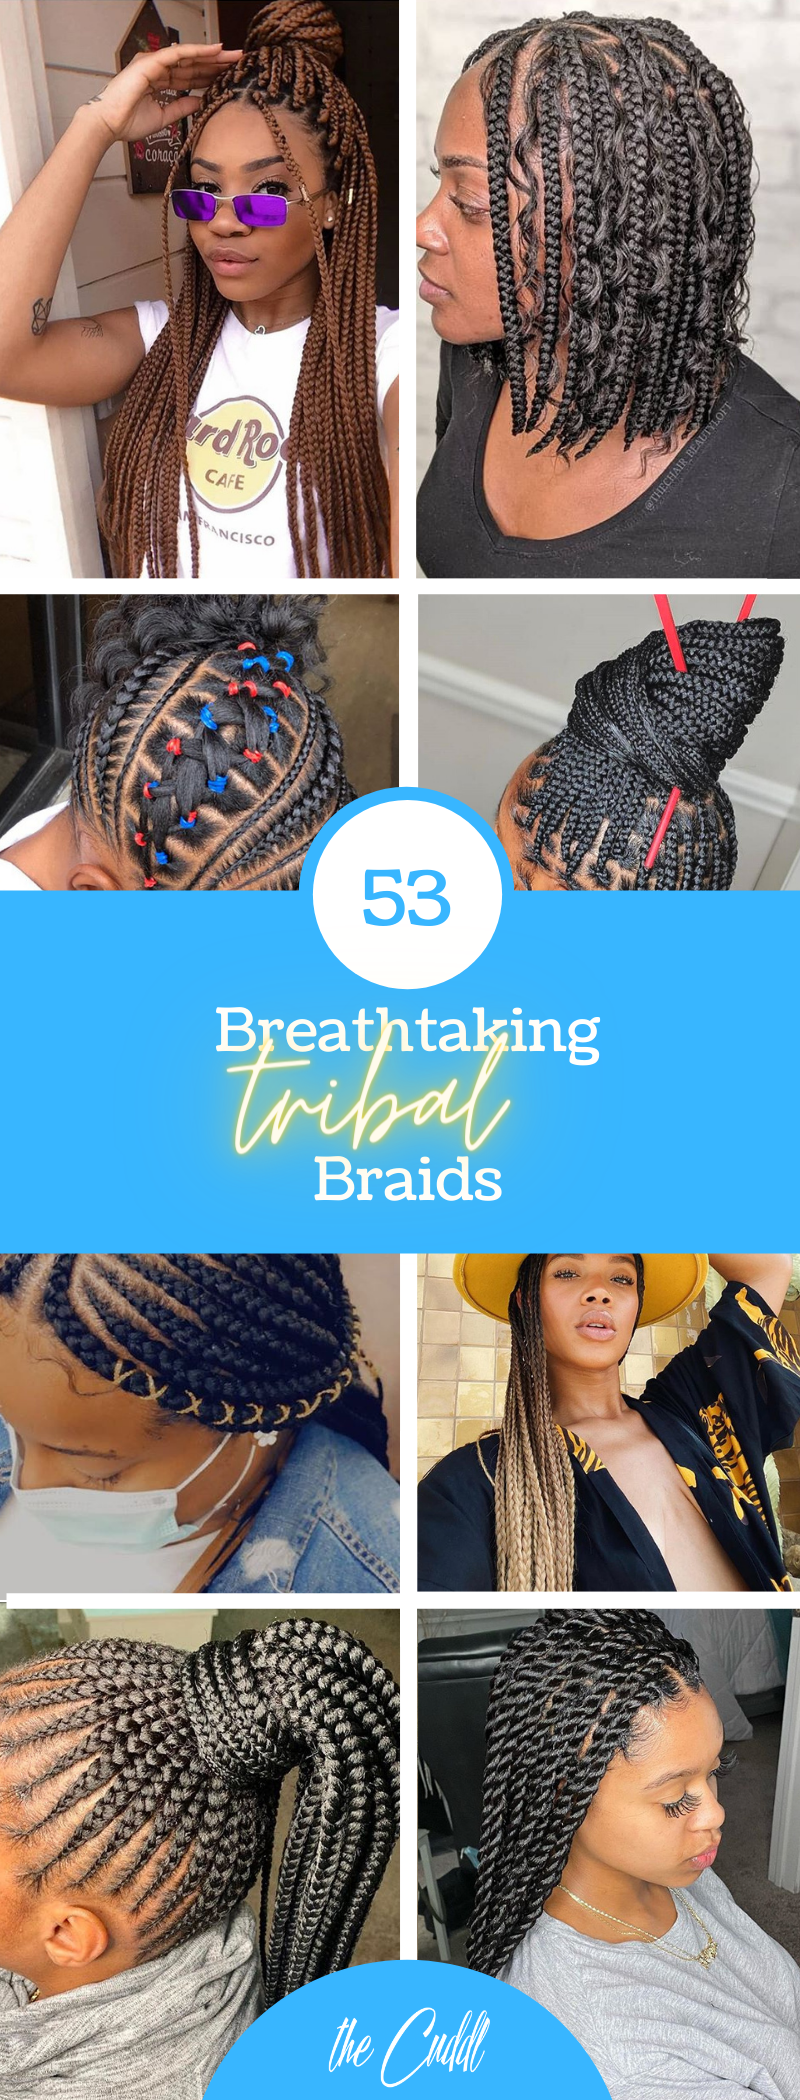 50 Mind-Blowing Tribal Braids Hairstyle Ideas Perfect For Everyday Living